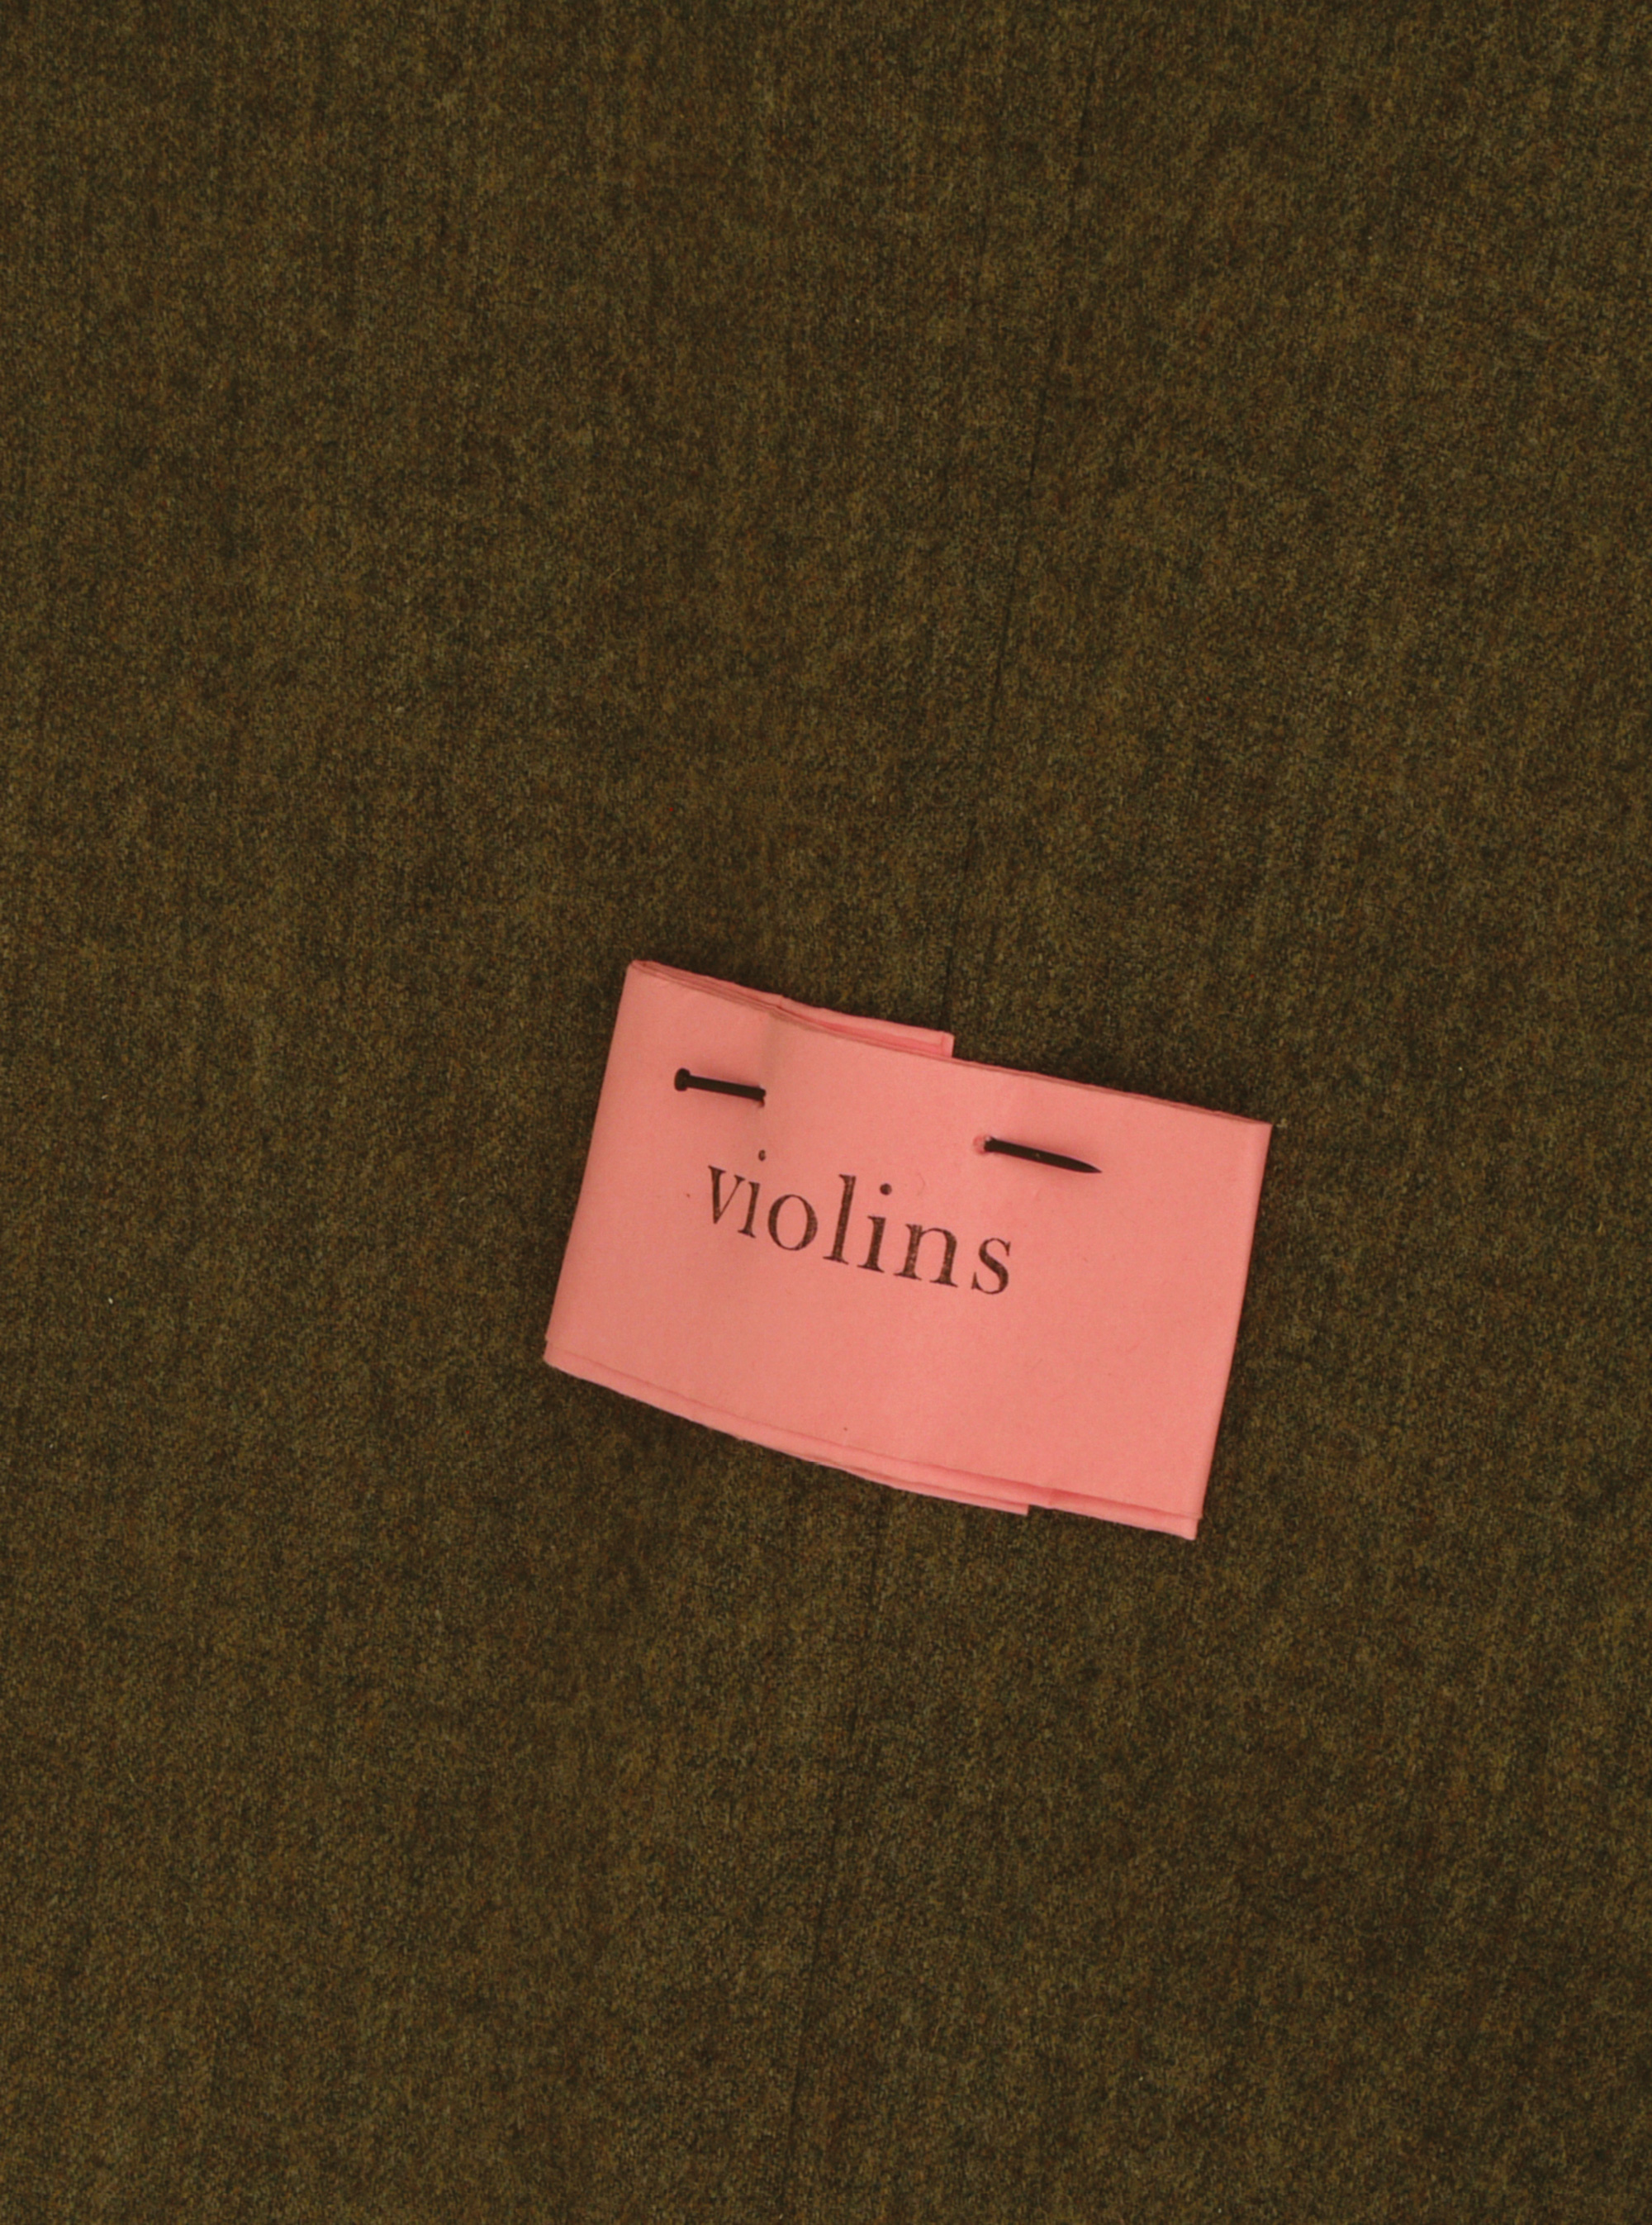 A photograph of the artist project by Jason Dodge, which consist of a piece of fabric on which a ribbon bearing the word “violins” has been printed. 